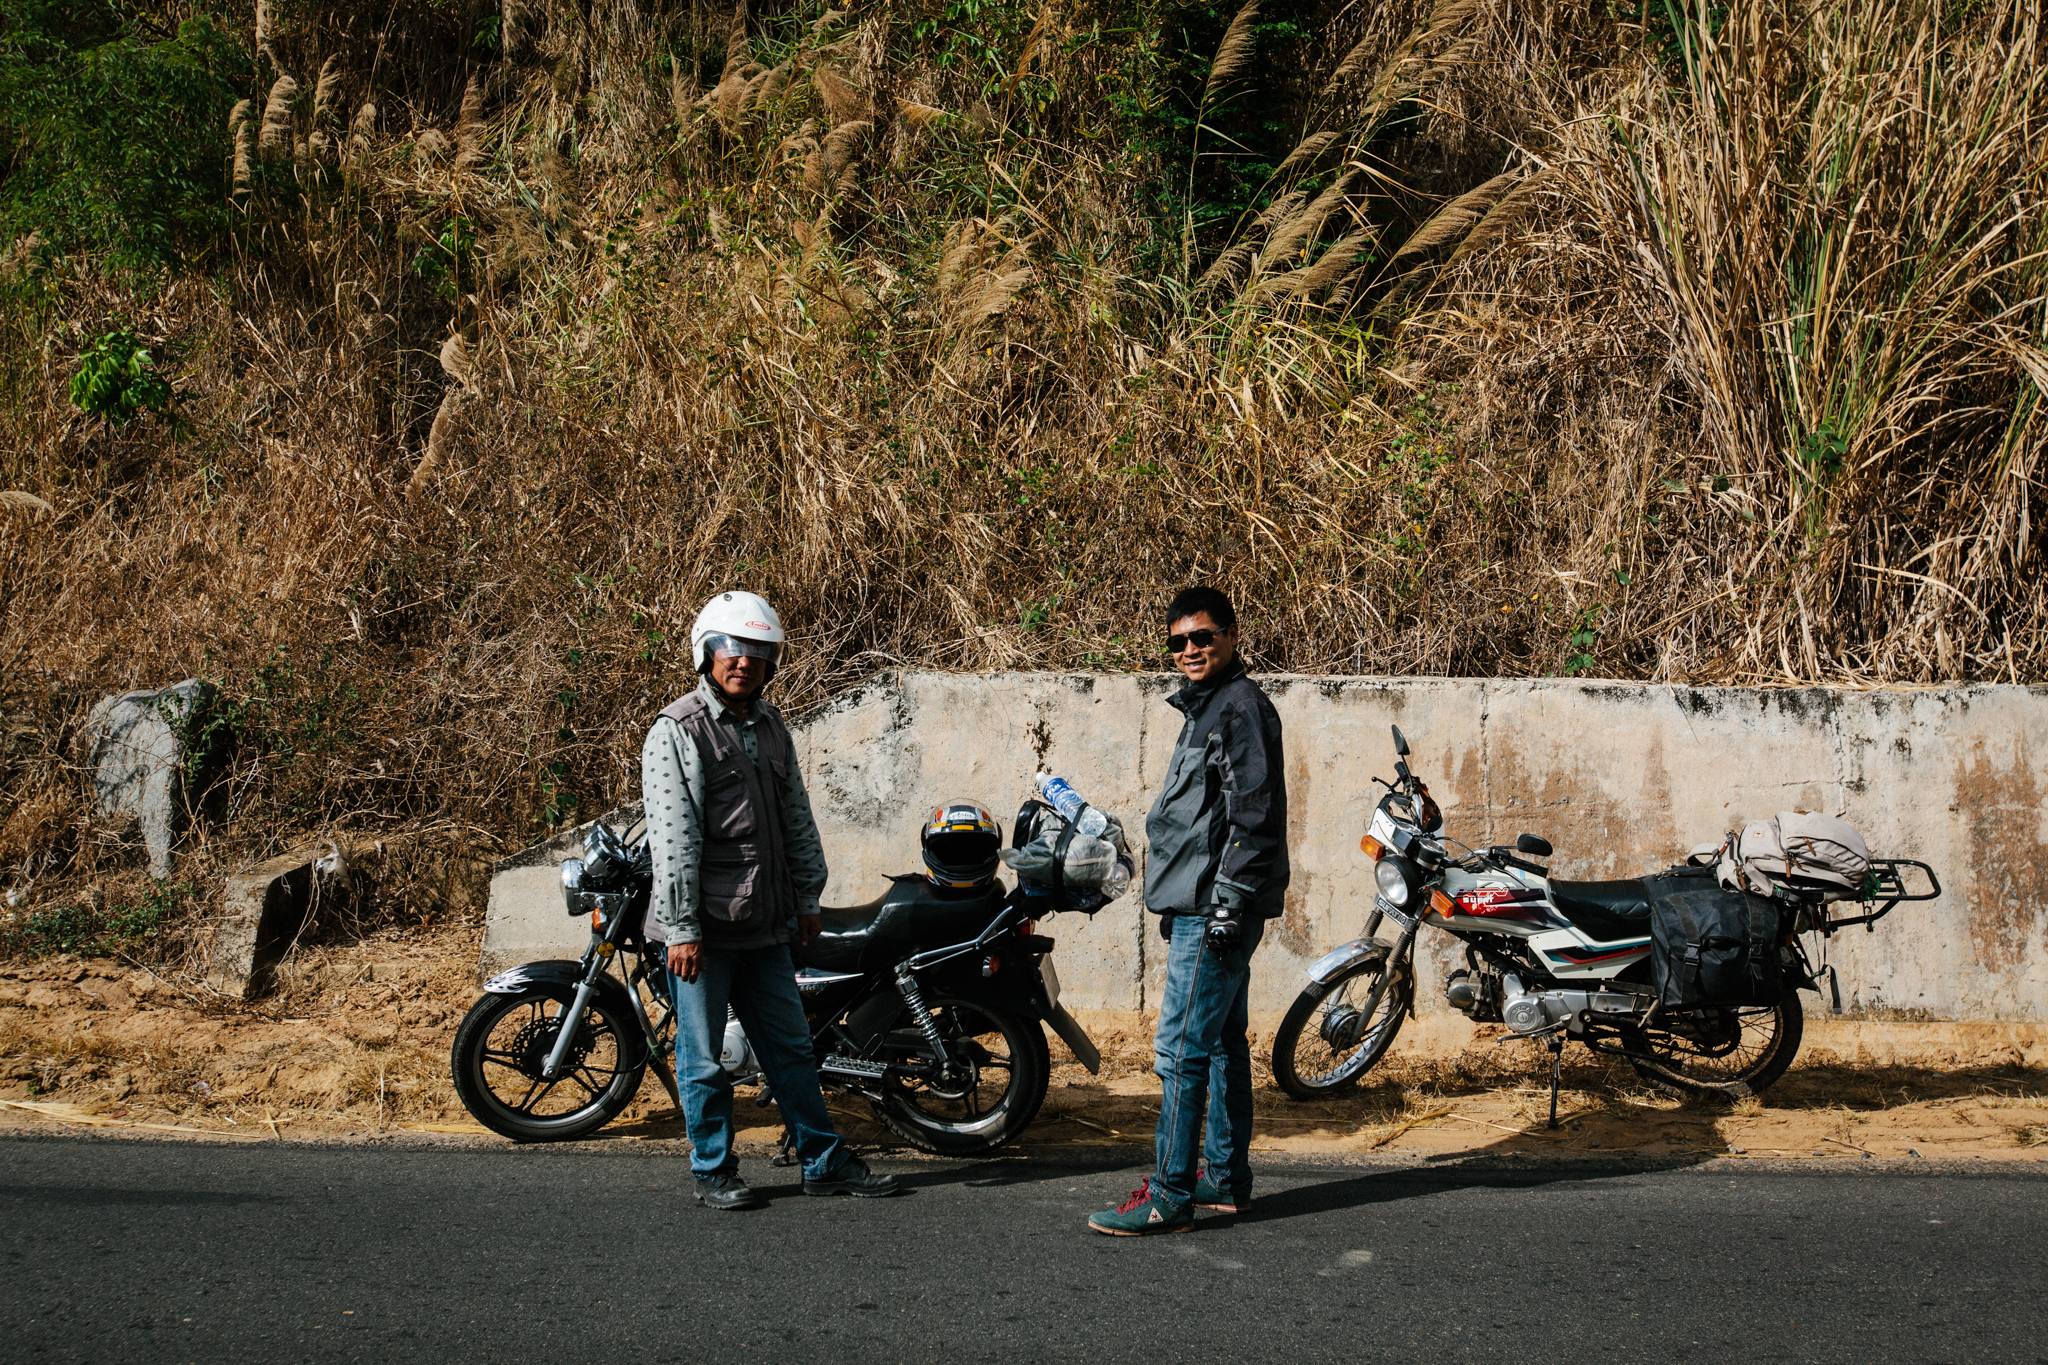 Riding Motorcycles And Ostriches In Vietnam’s Mountains